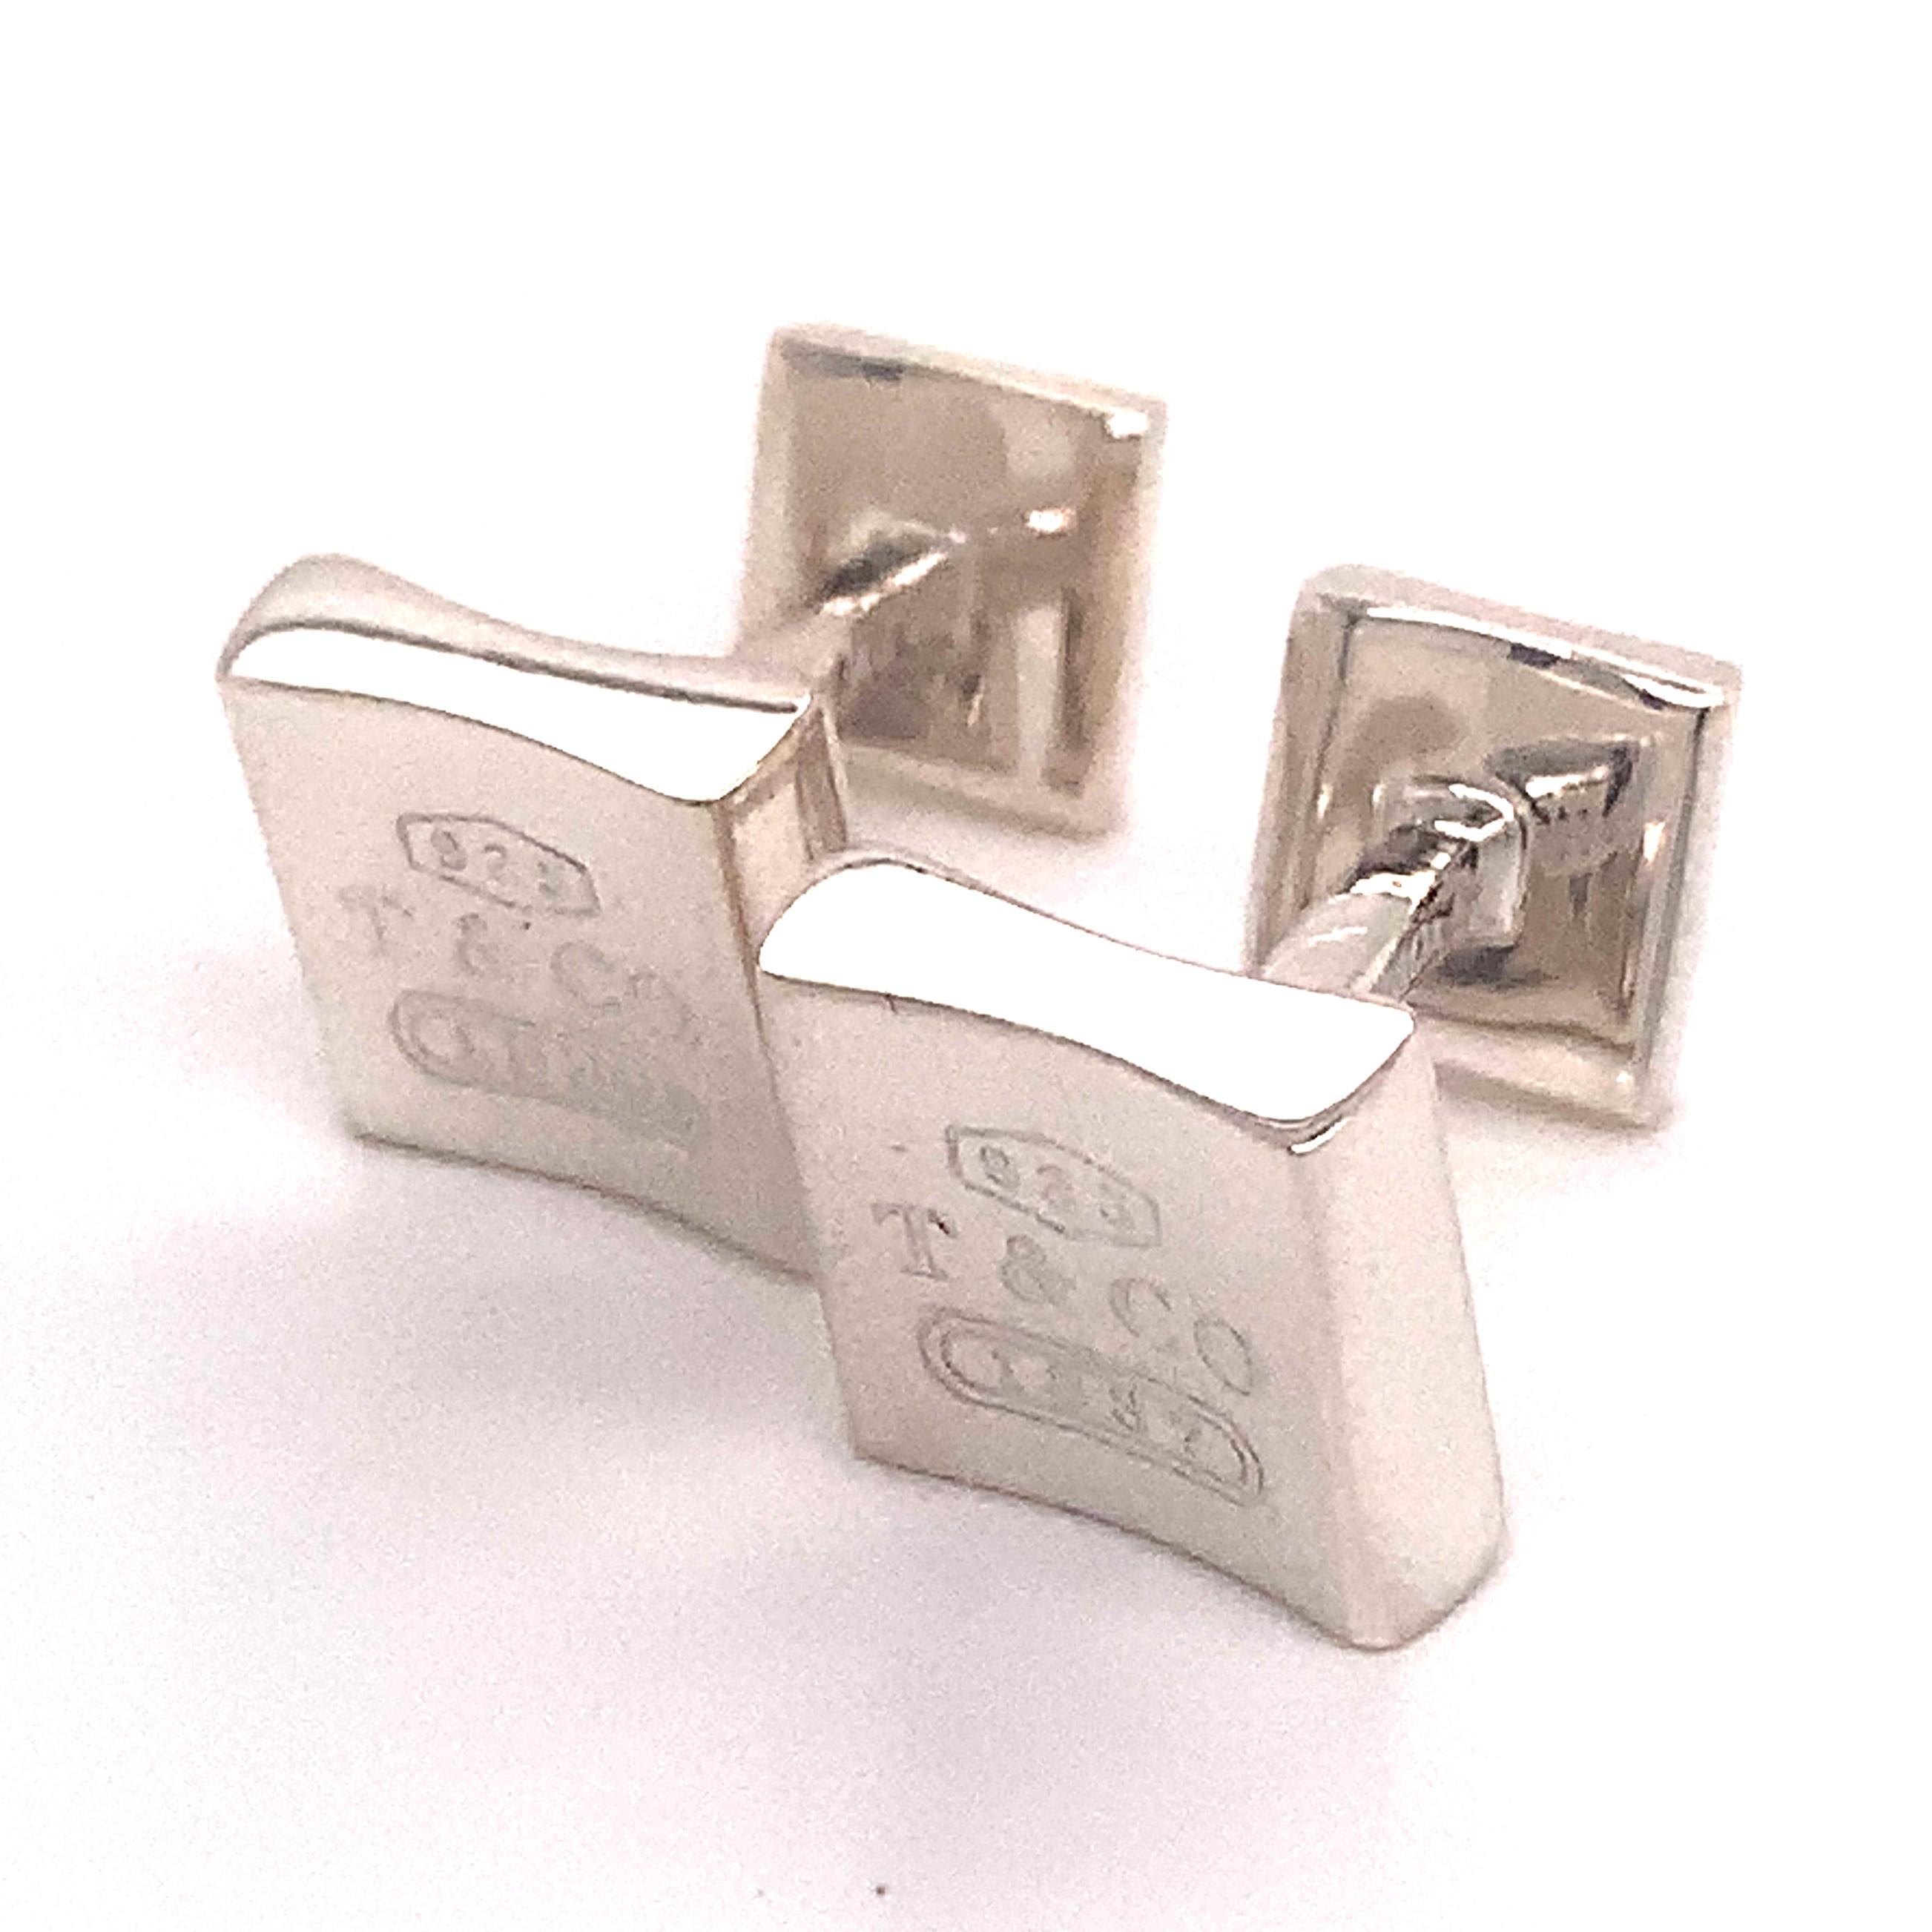 Tiffany & Co Estate Cufflinks Sterling Silver TIF48
  
The Tiffany & Co items have a natural patina As they are estate silver pieces.
 
We polish most of our estate Tiffany pieces so that they will be fresh for their new owners but many clients wish